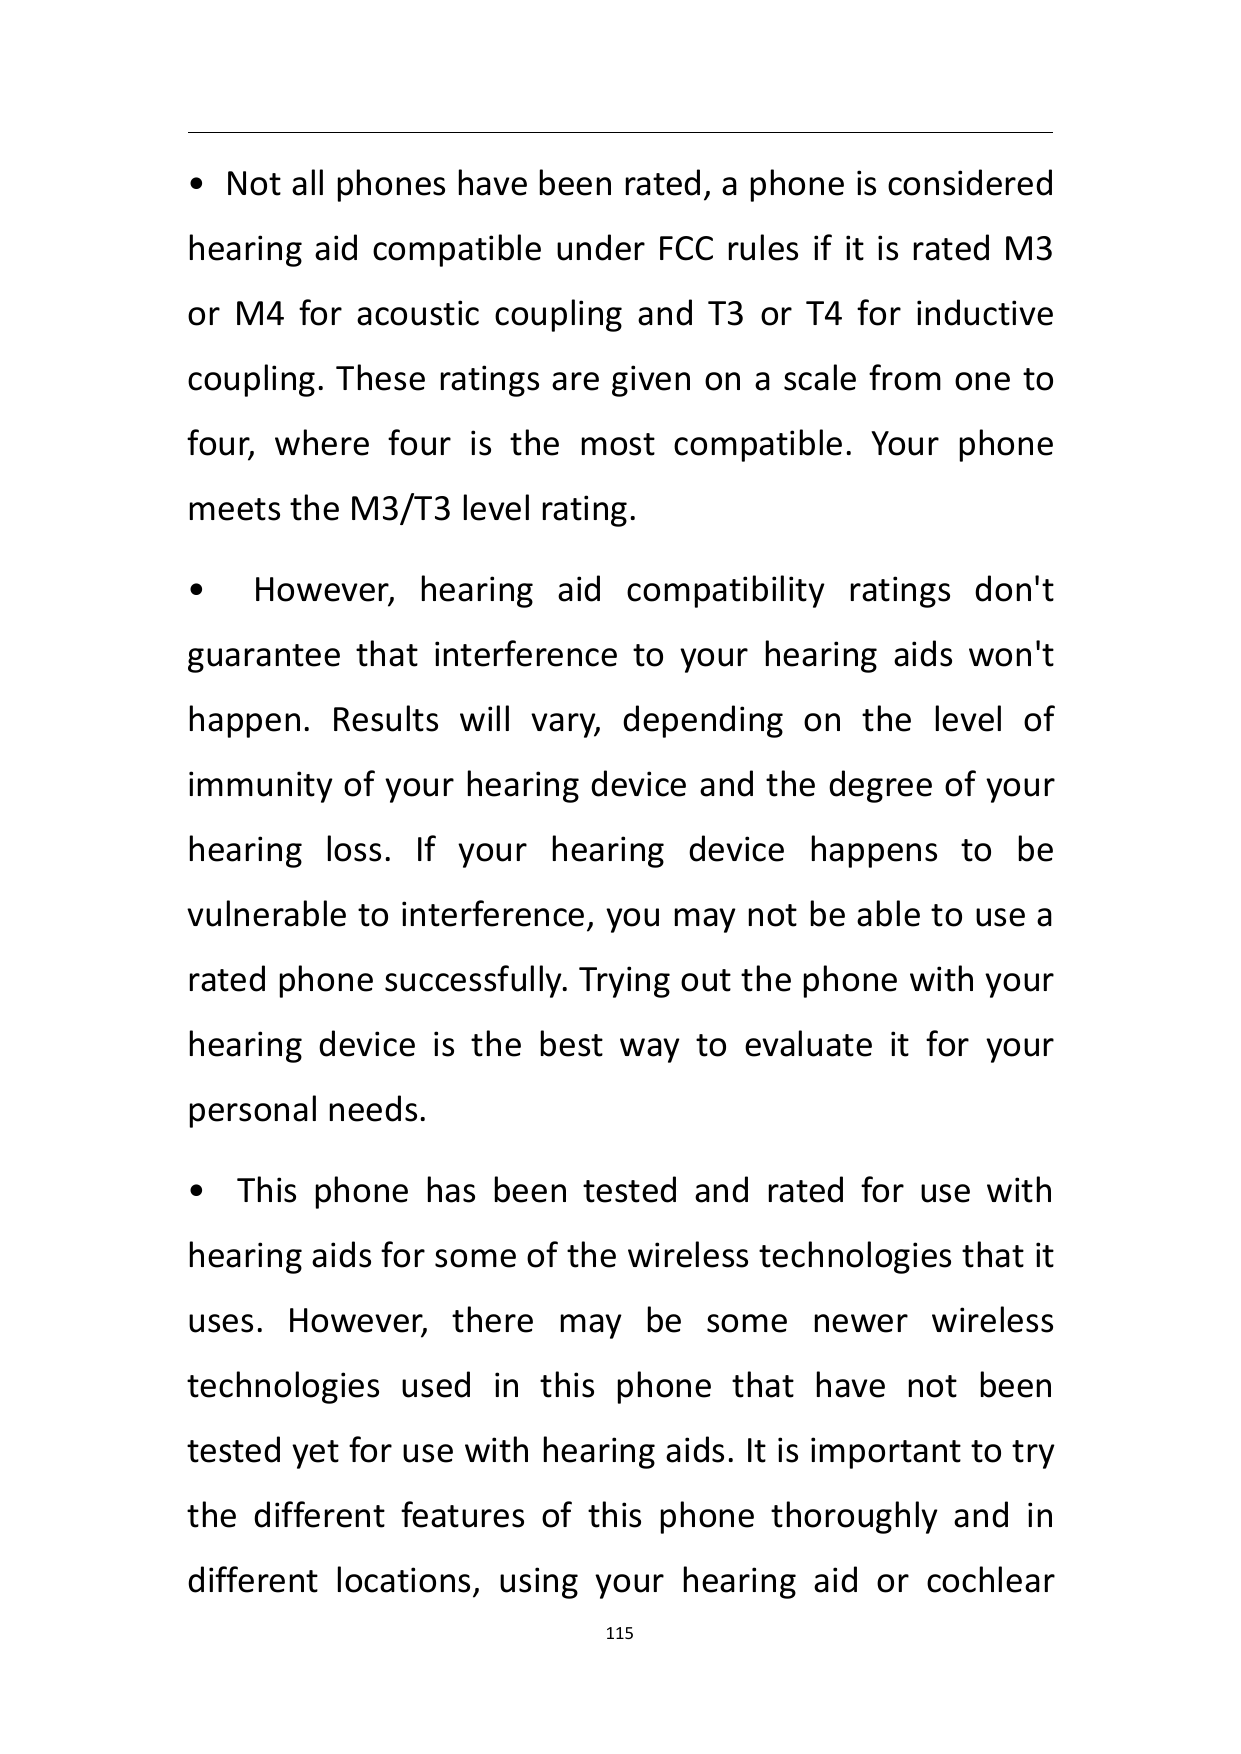 • Not all phones have been rated, a phone is consideredhearing aid compatible under FCC rules if it is rated M3or M4 for acousti